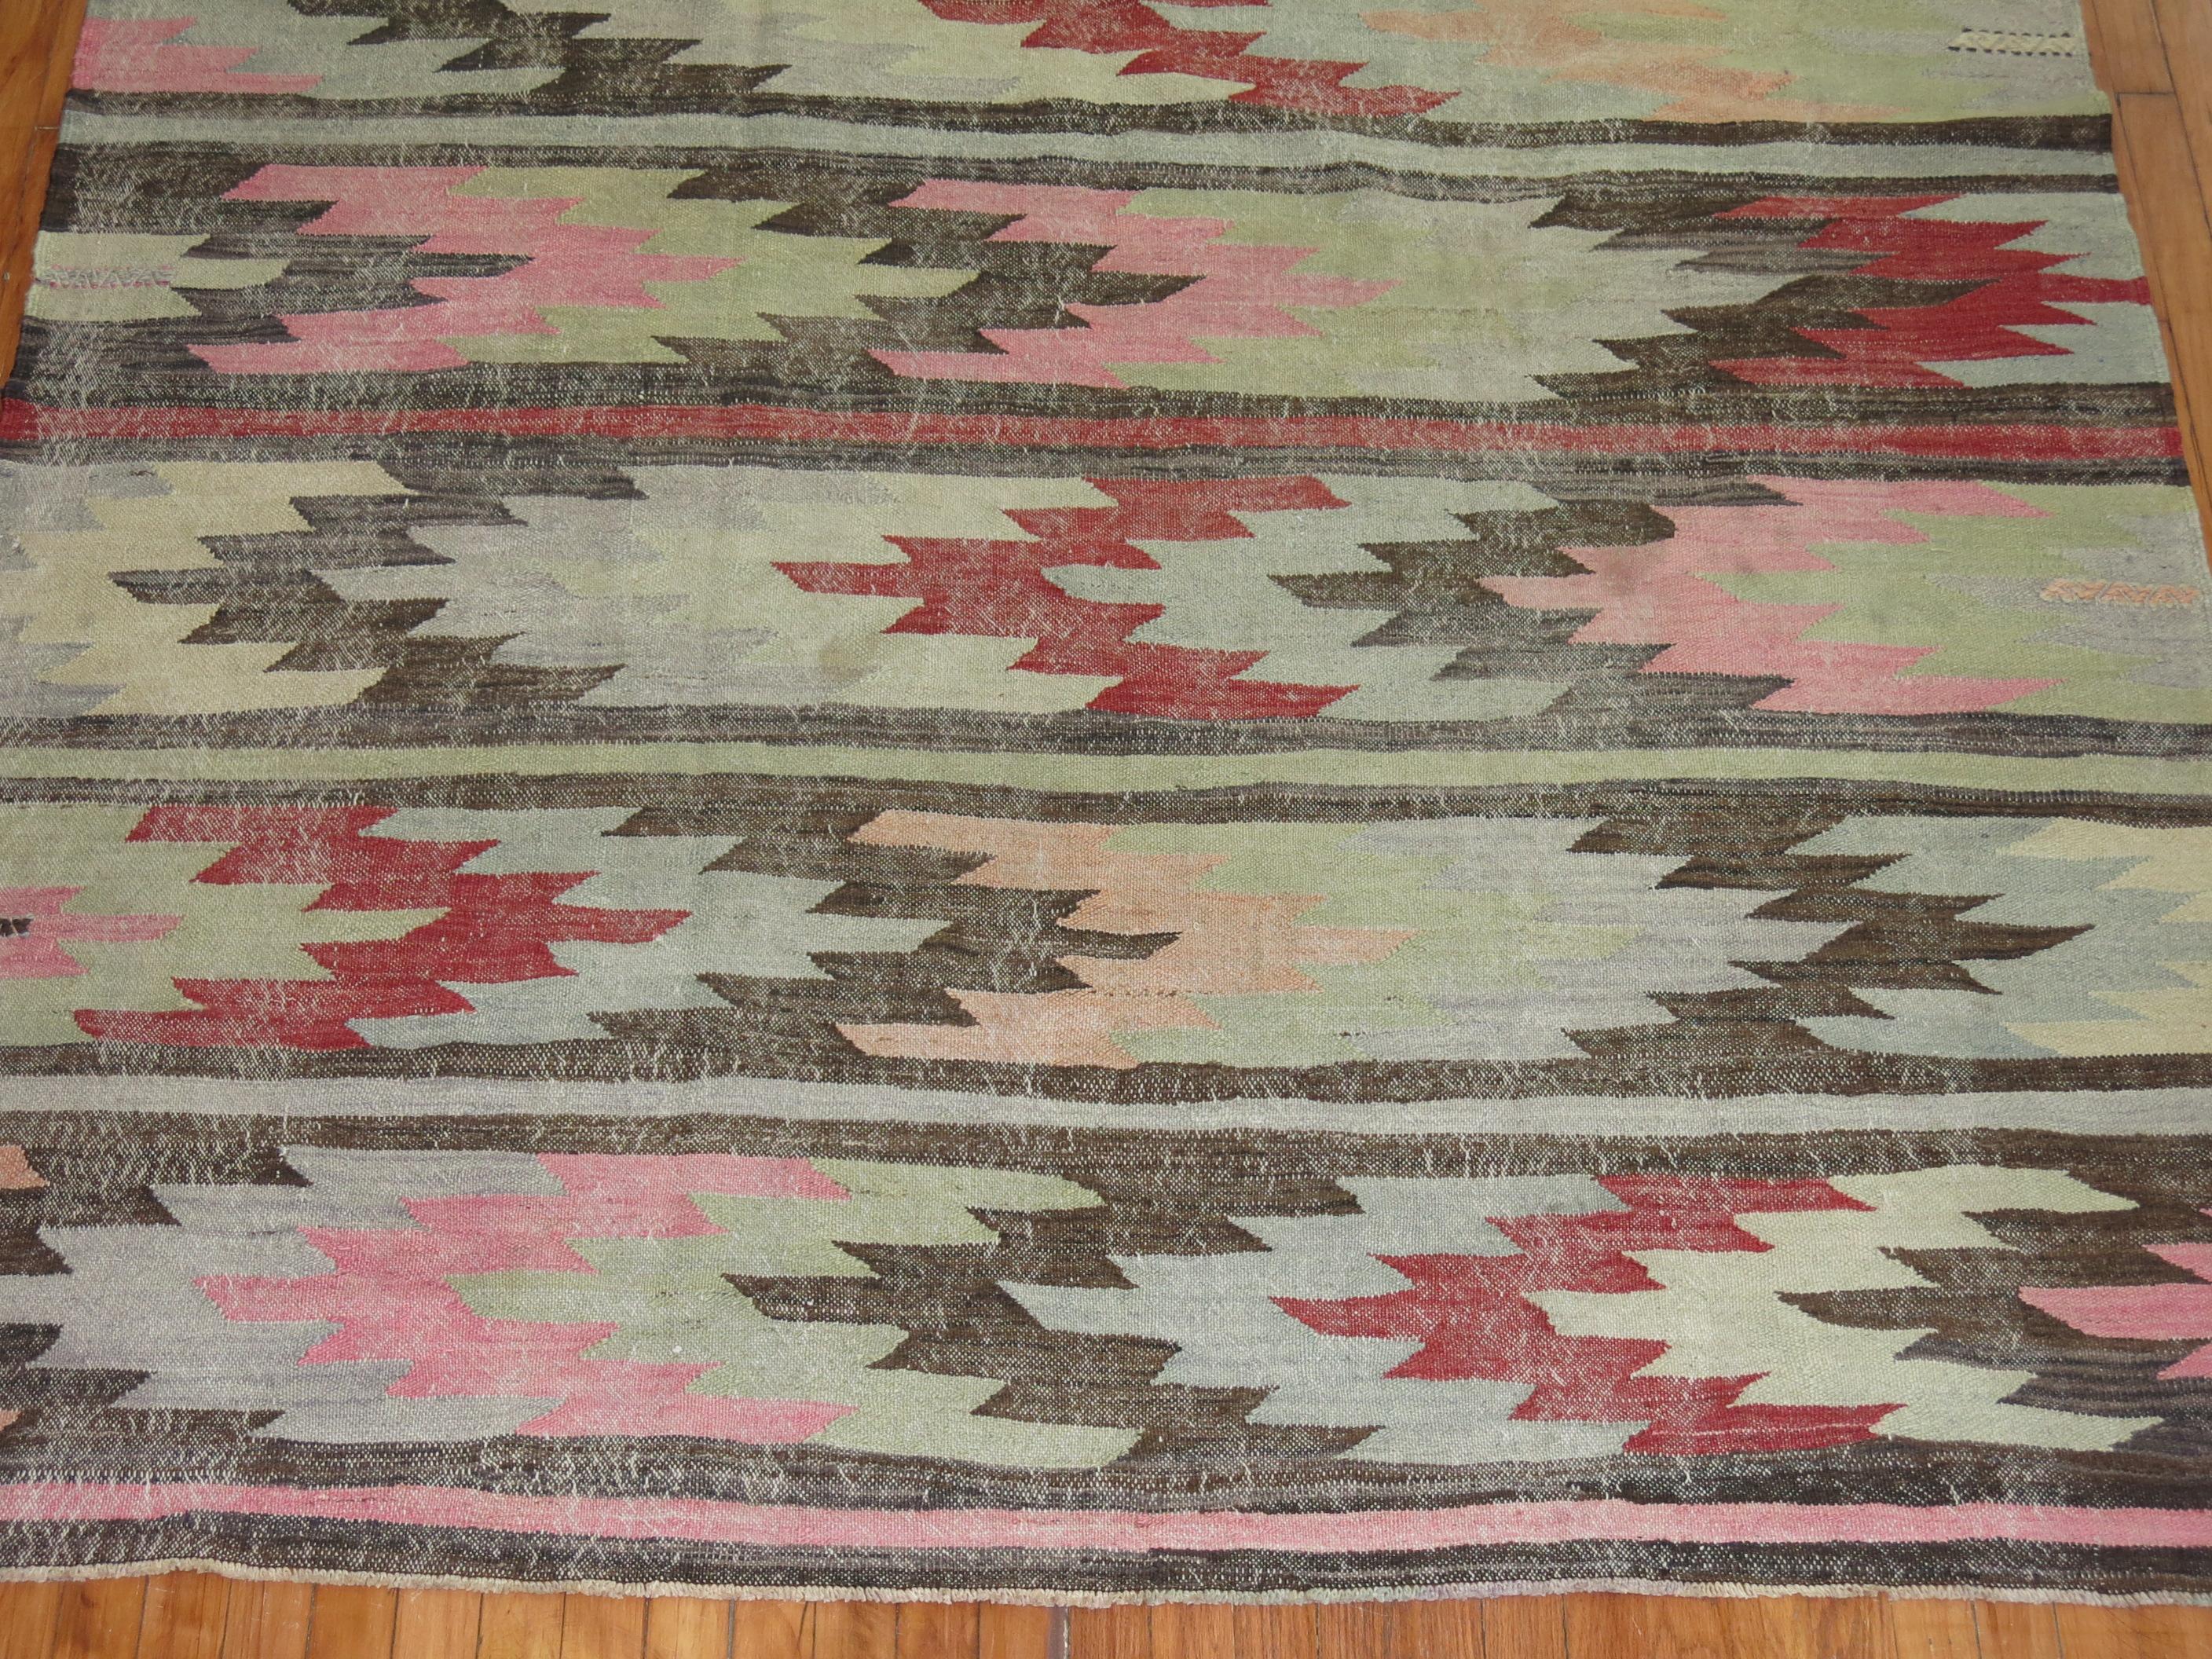 Mid-20th century evenly worn Turkish kilim in pink, green, cream, red, blue and gray accents on a charcoal field.

Measures: 6'1